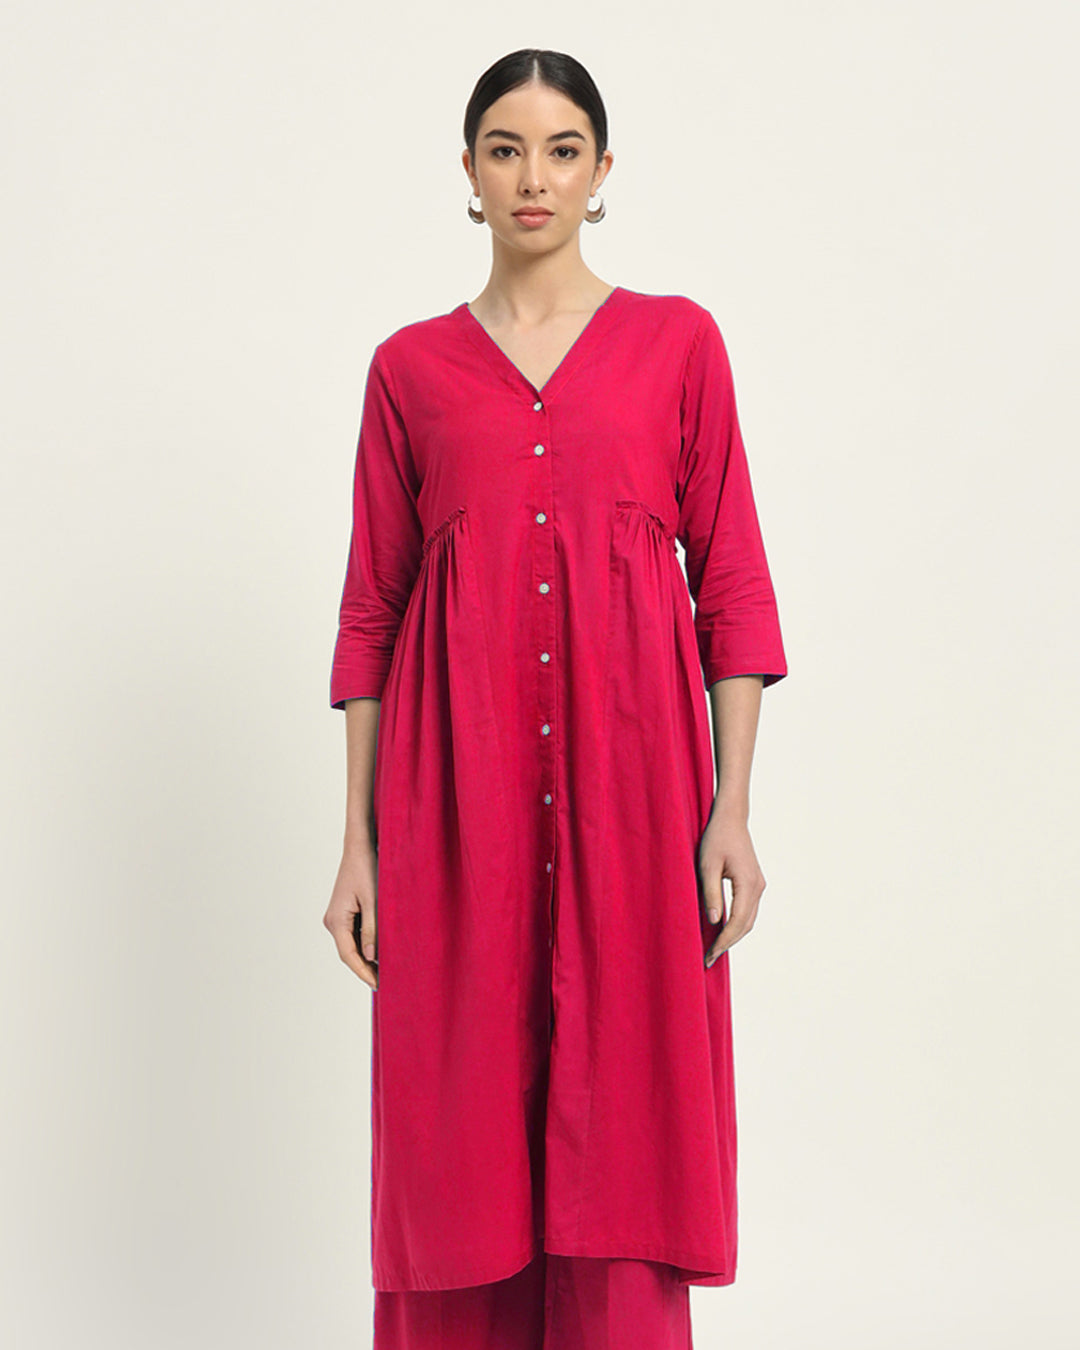 Queen's Gulabi Whimsy Affair Buttoned Solid Kurta (Without Bottoms)